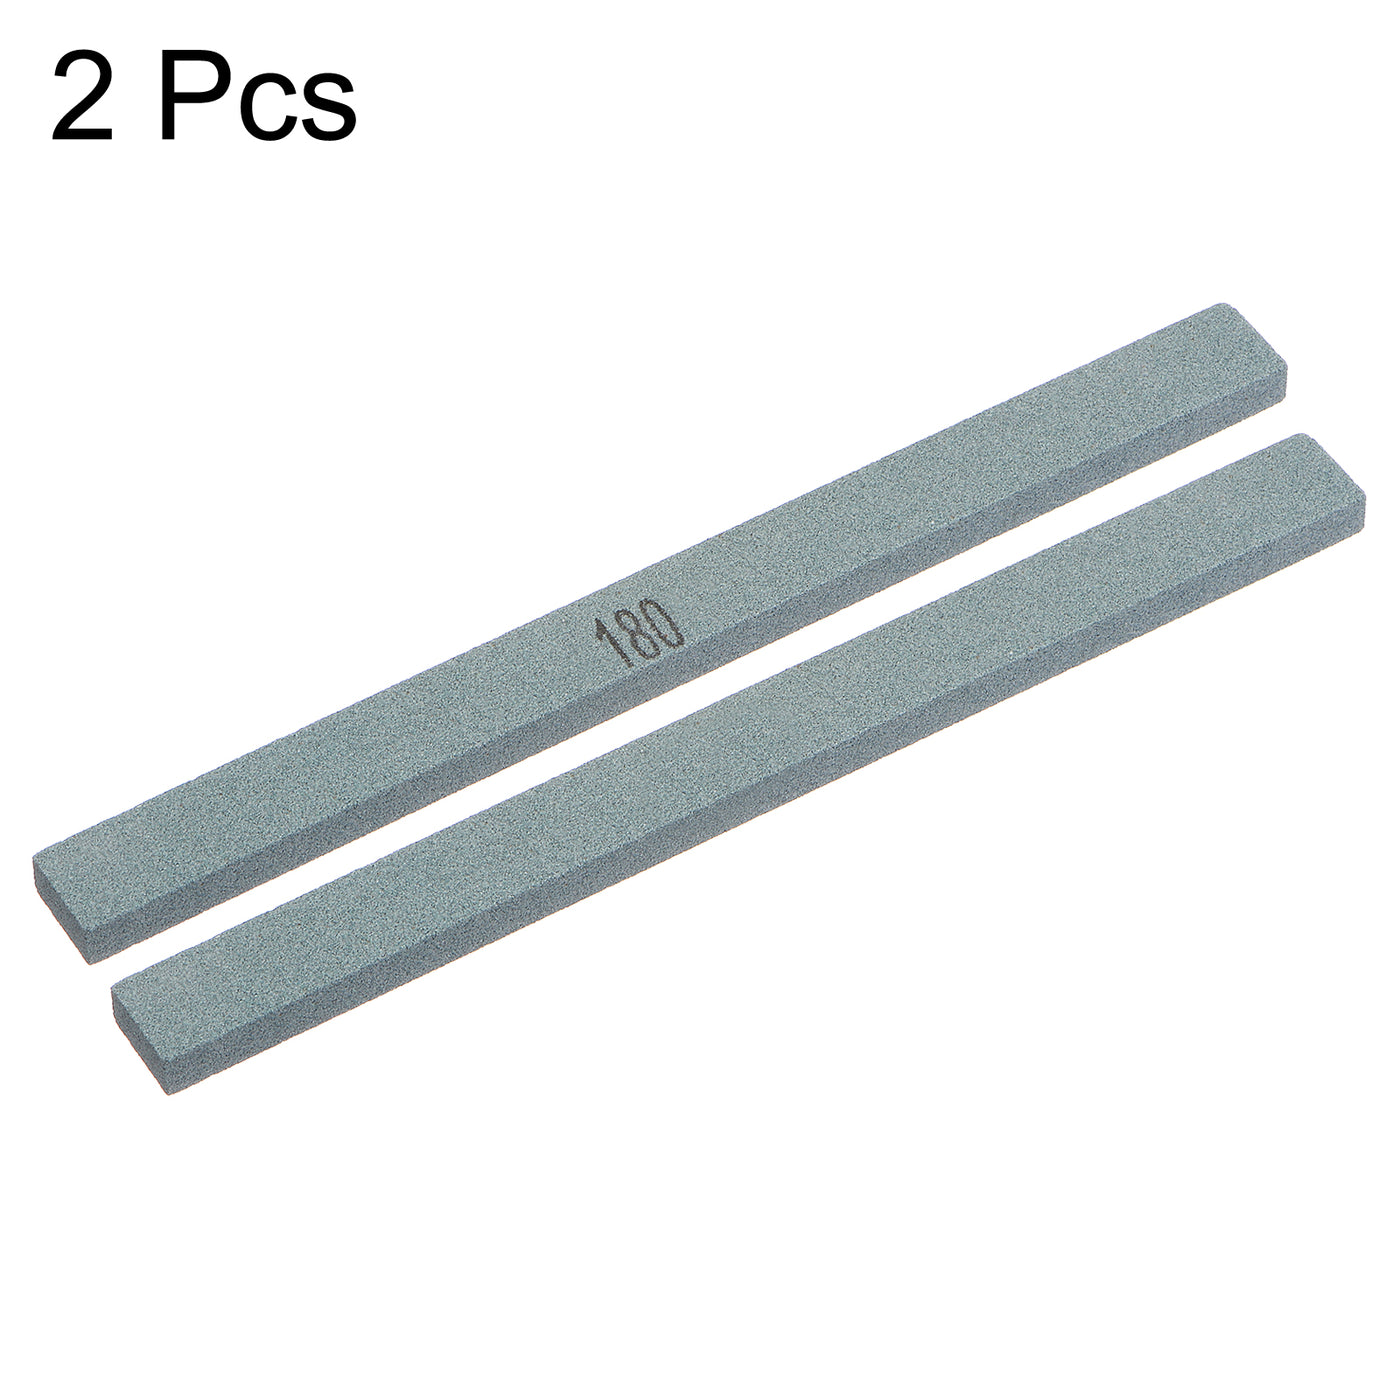 Uxcell Uxcell Sharpening Stones 180 Grit Green Silicon Carbide Polishing Stone Whetstone 2pcs